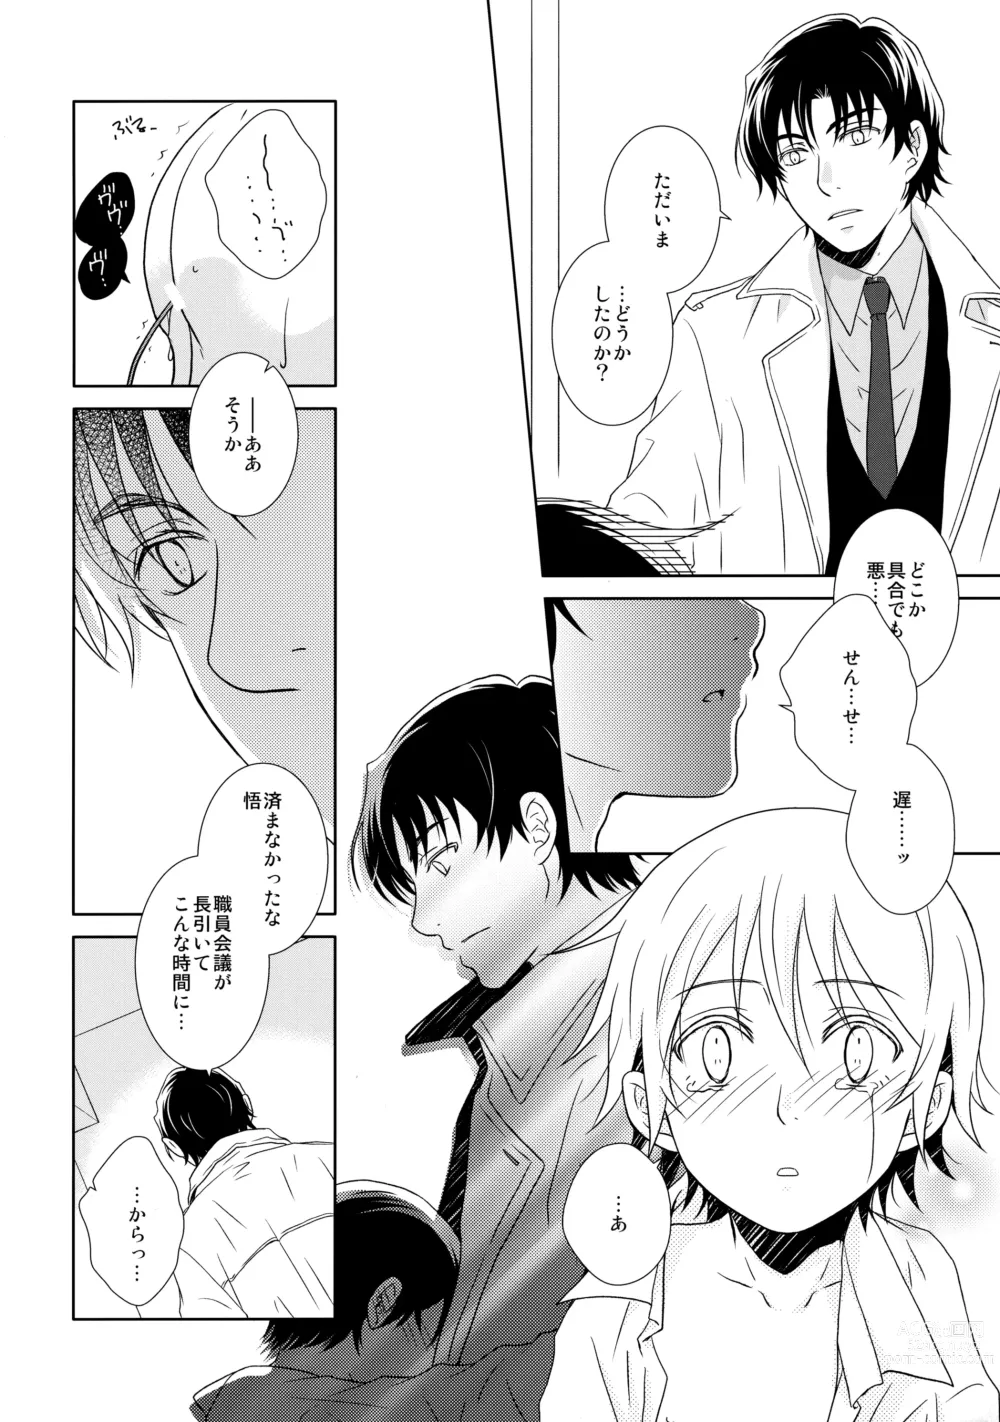 Page 5 of doujinshi Butterfield 8